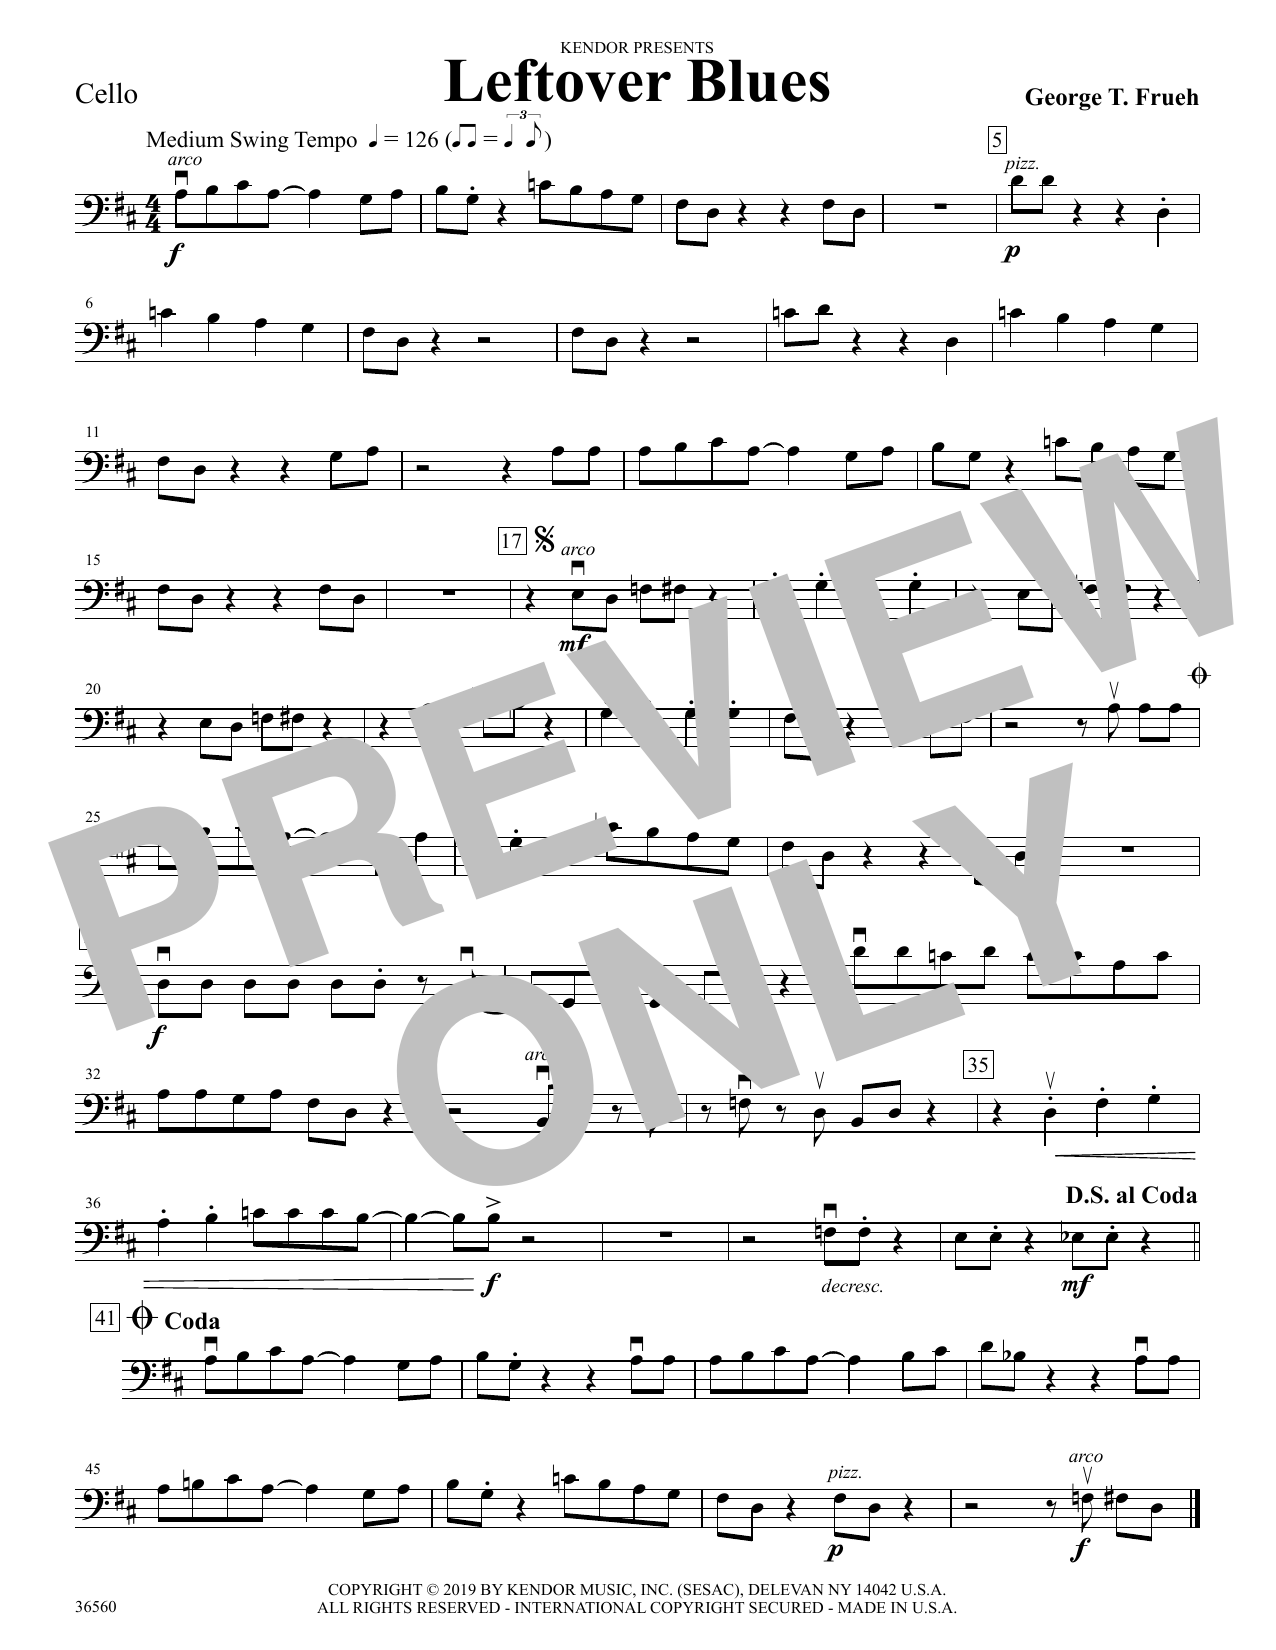 Download George Frueh Leftover Blues - Cello Sheet Music